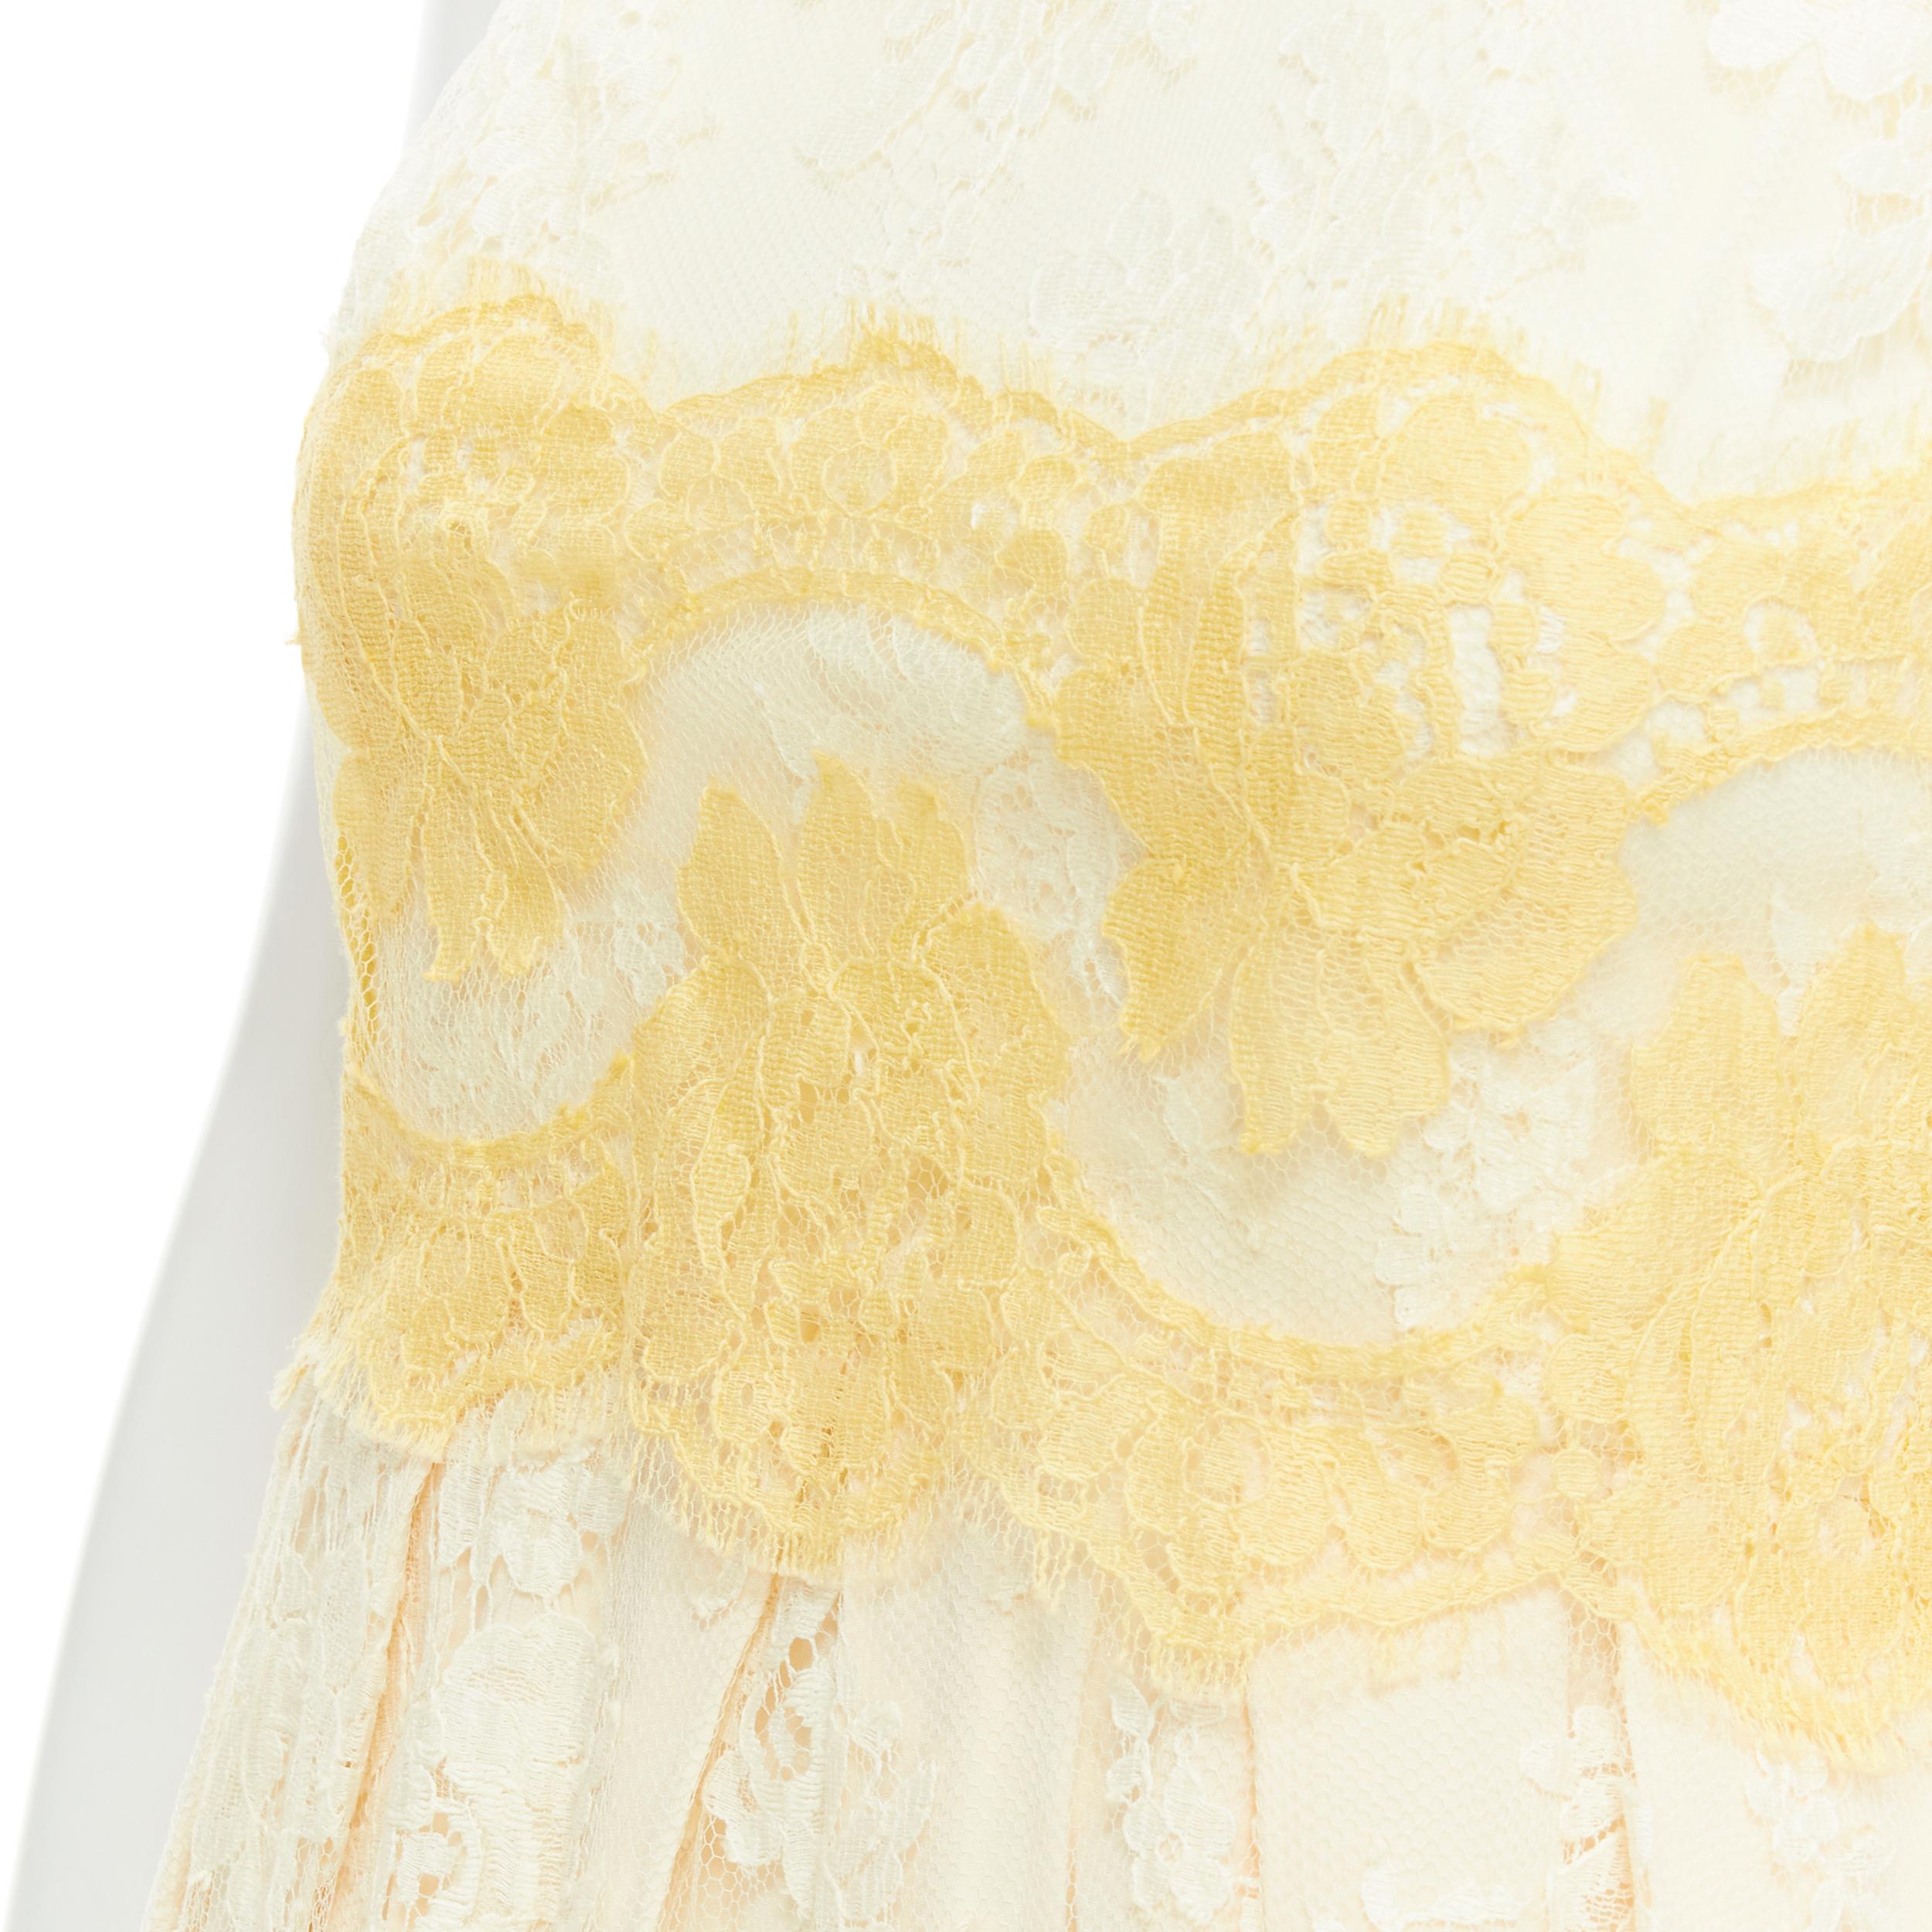 DOLCE GABBANA white pastel yellow pink lace fit flared cocktail dress IT36 XS 
Reference: TGAS/B02033 
Brand: Dolce Gabbana 
Material: Lace 
Color: White 
Pattern: Floral 
Closure: Zip 
Made in: Italy 

CONDITION: 
Condition: Very good, this item